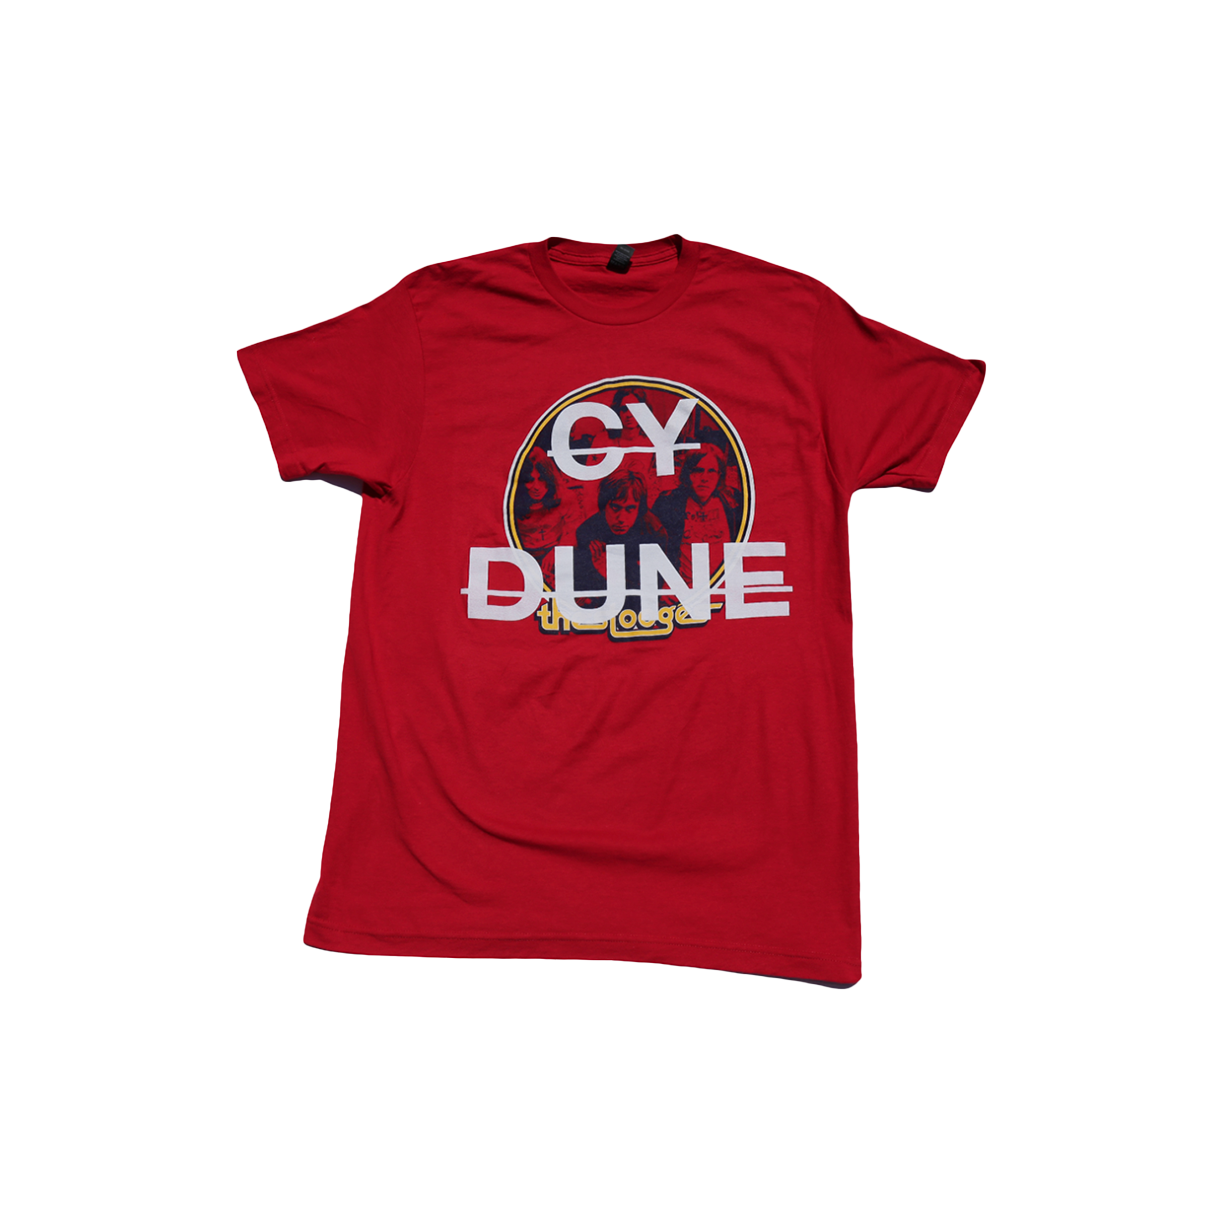 Cy Dune Stooges Shirt (Large)